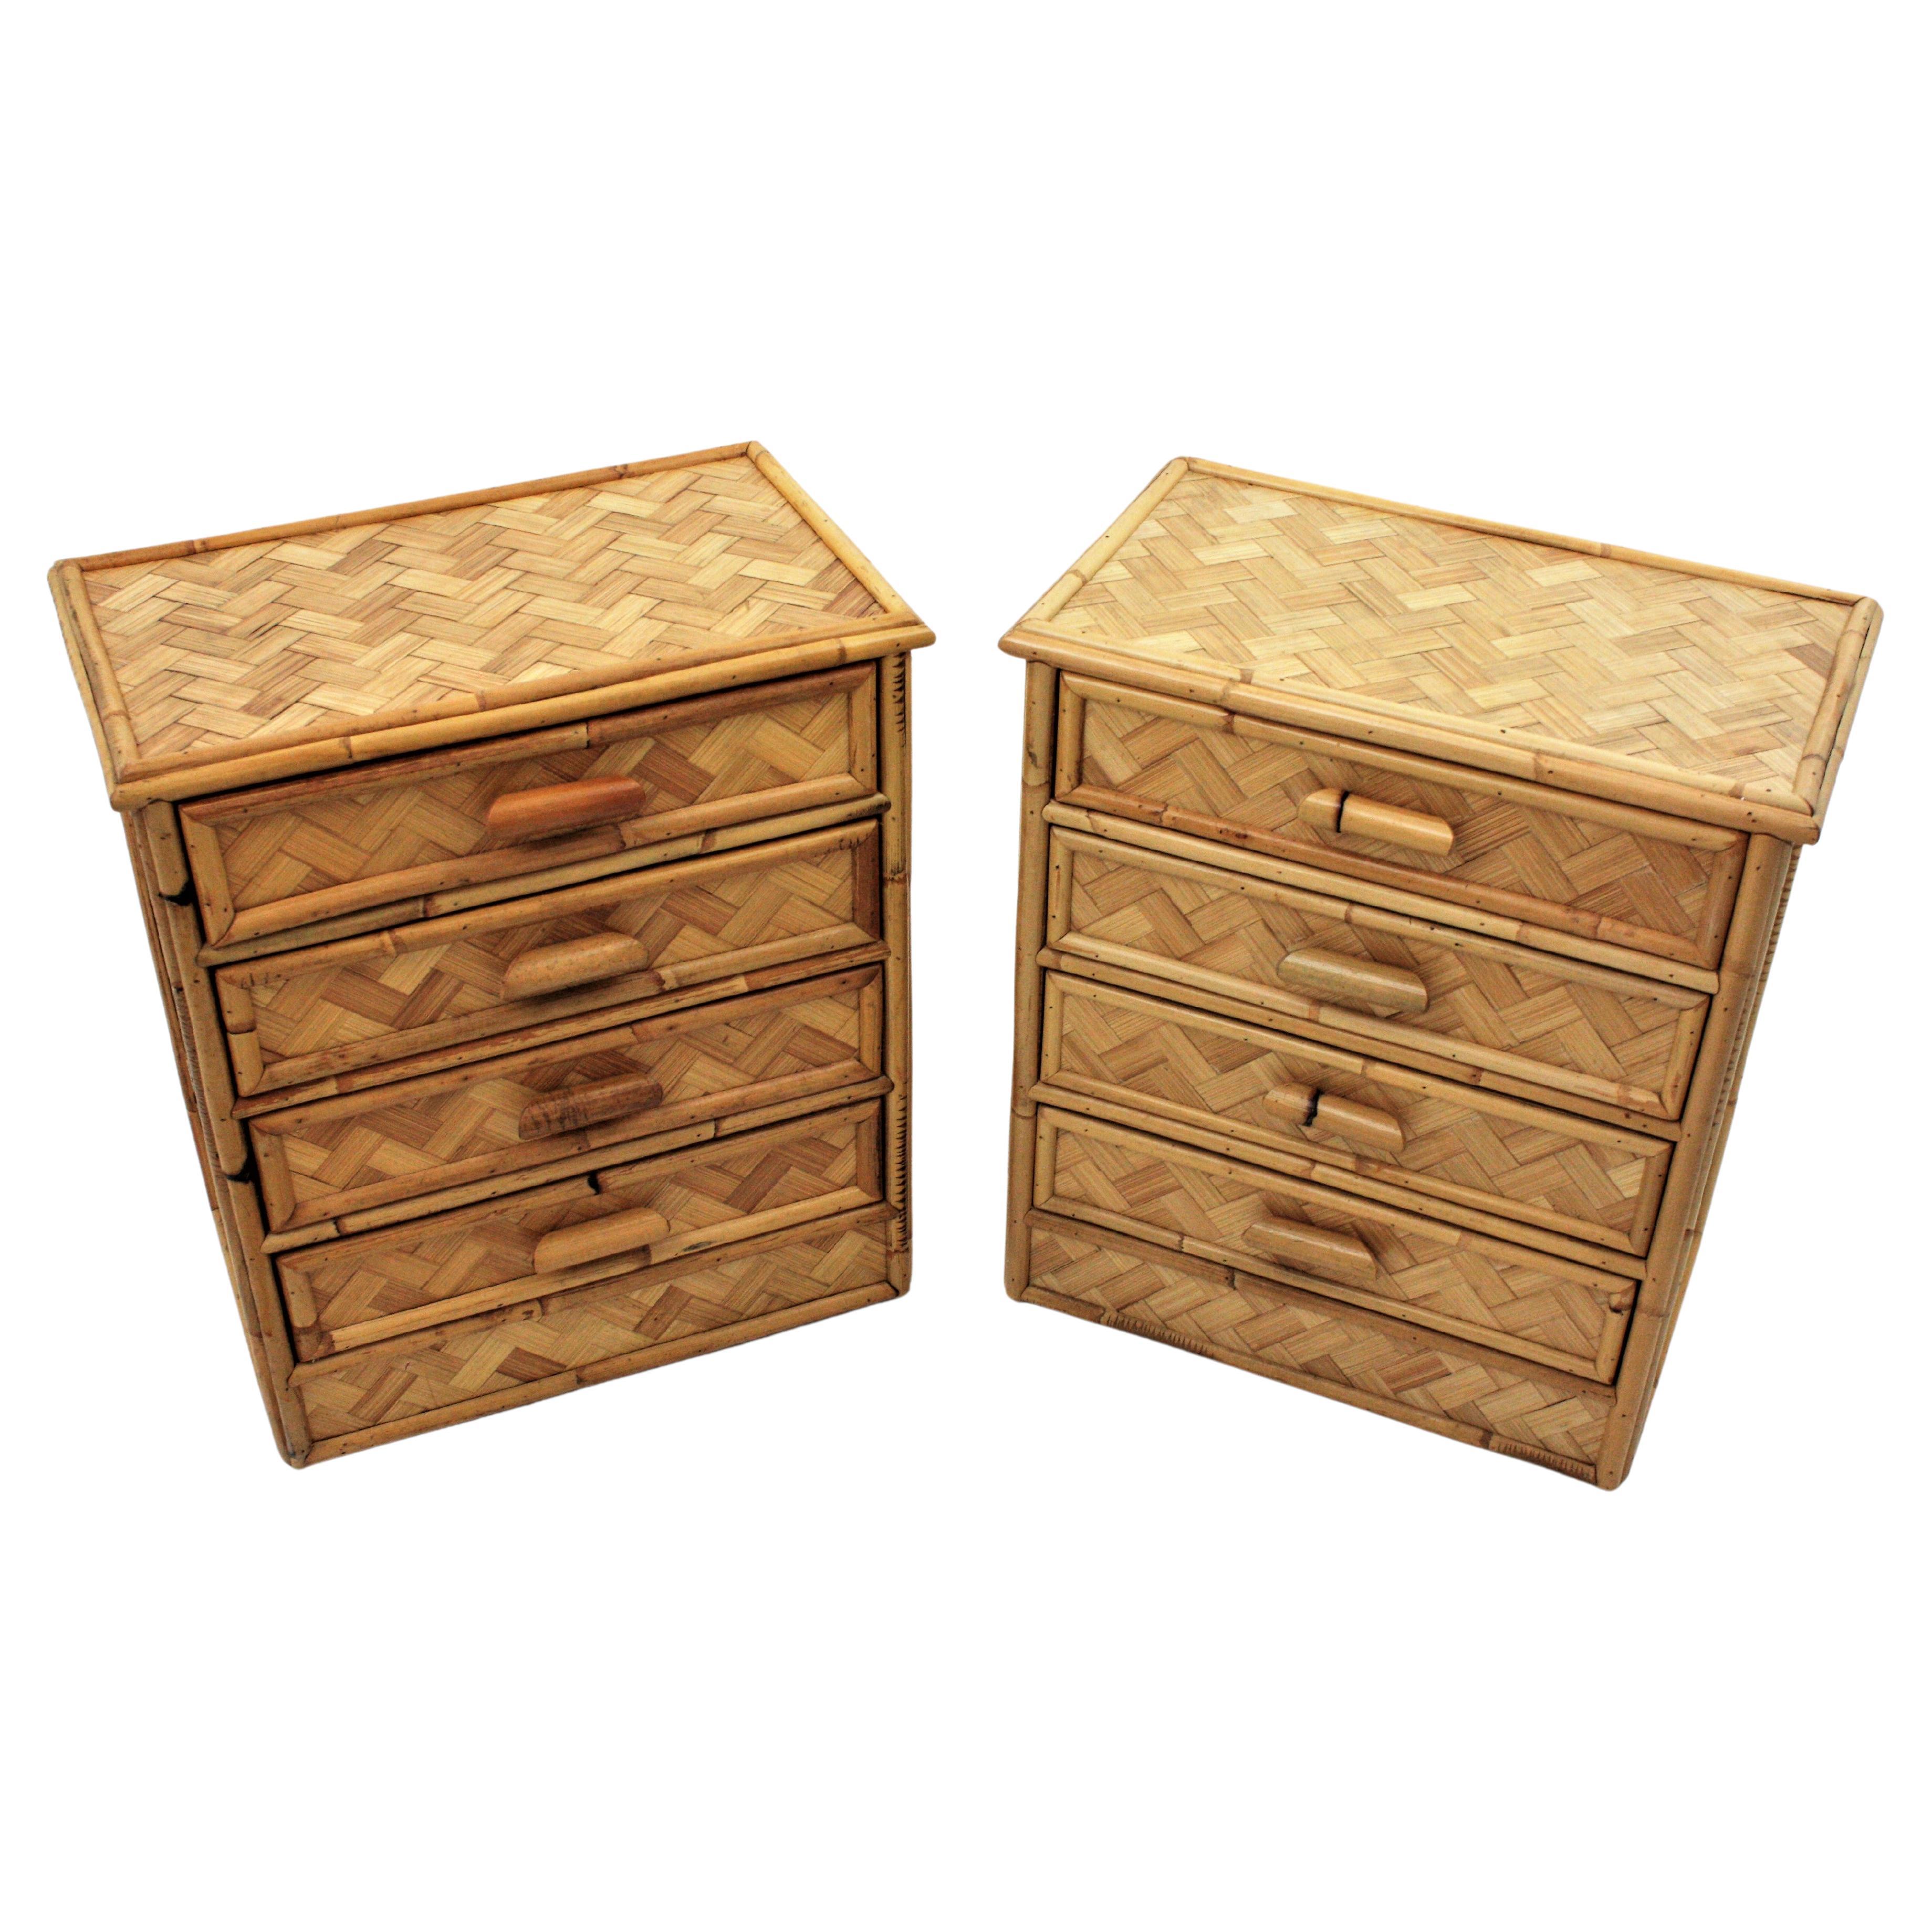 Pair of Spanish Modern bamboo four-drawer end table stands or small chests, 1970s. 
Eye-catching pair of woven bamboo and rattan bedside tables, end tables or nightstands. These small chests of drawers have a rattan and bamboo construction.